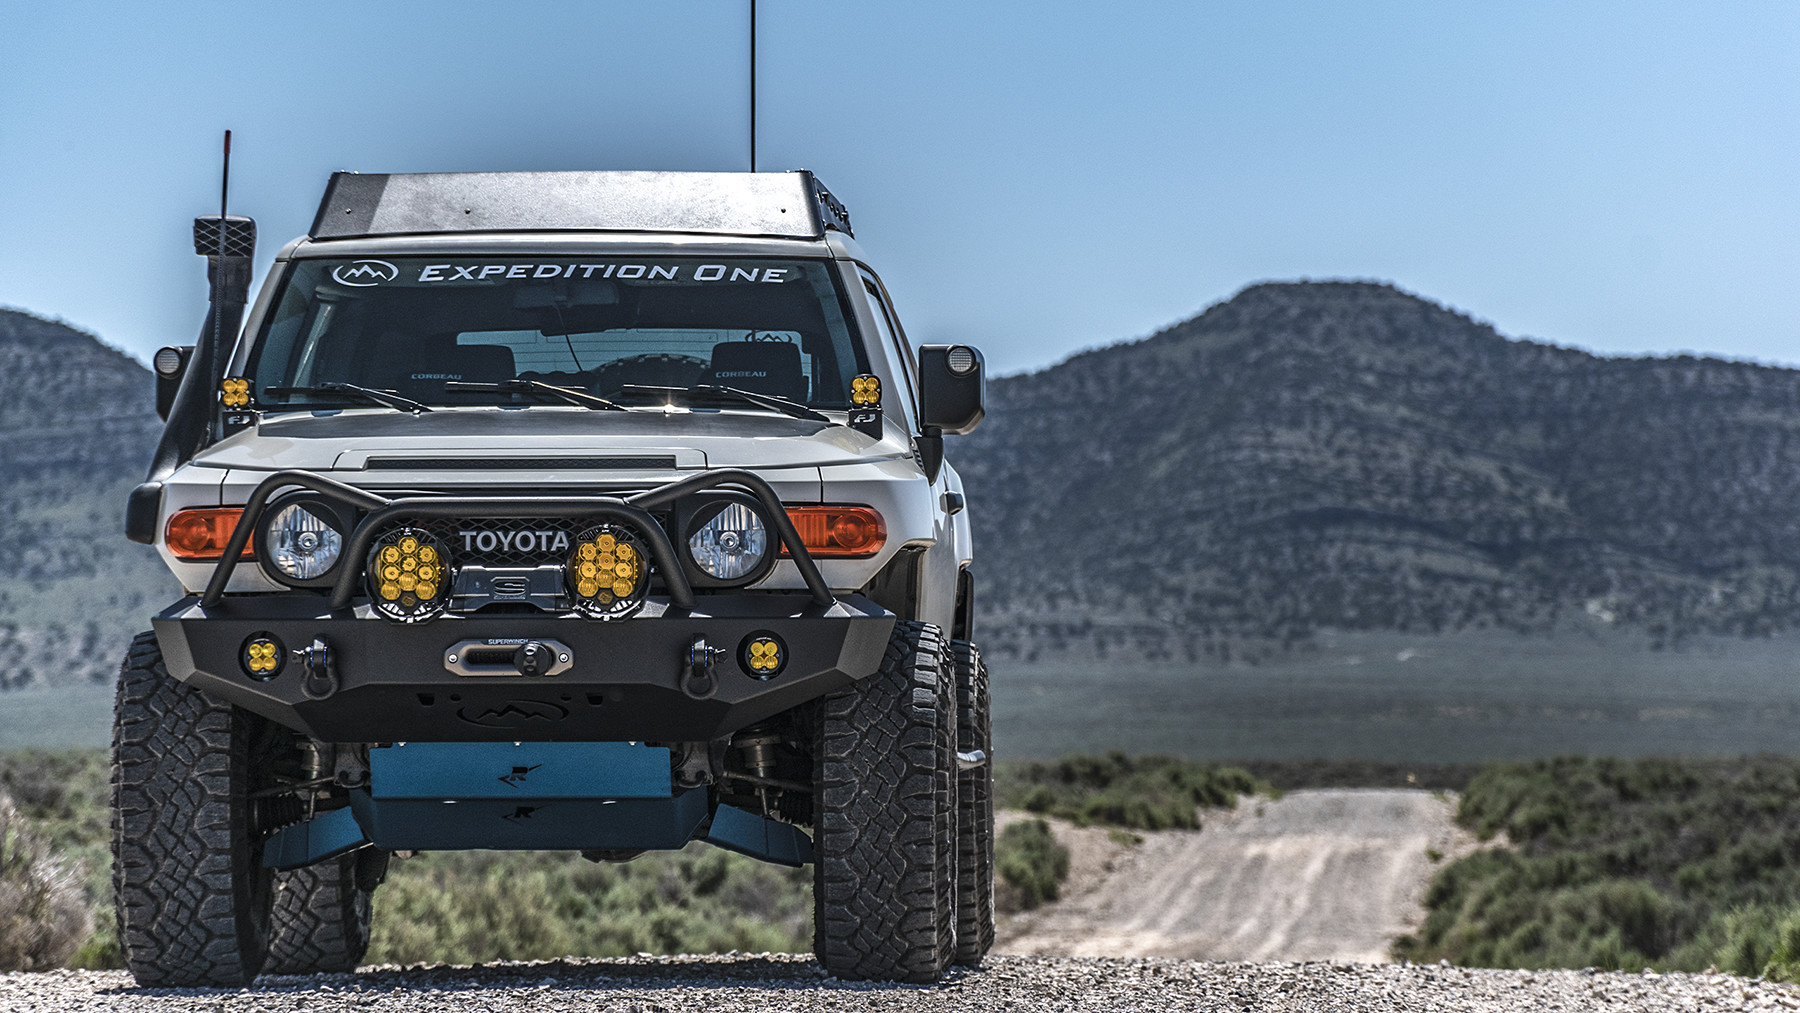 Fj Road Expedition One